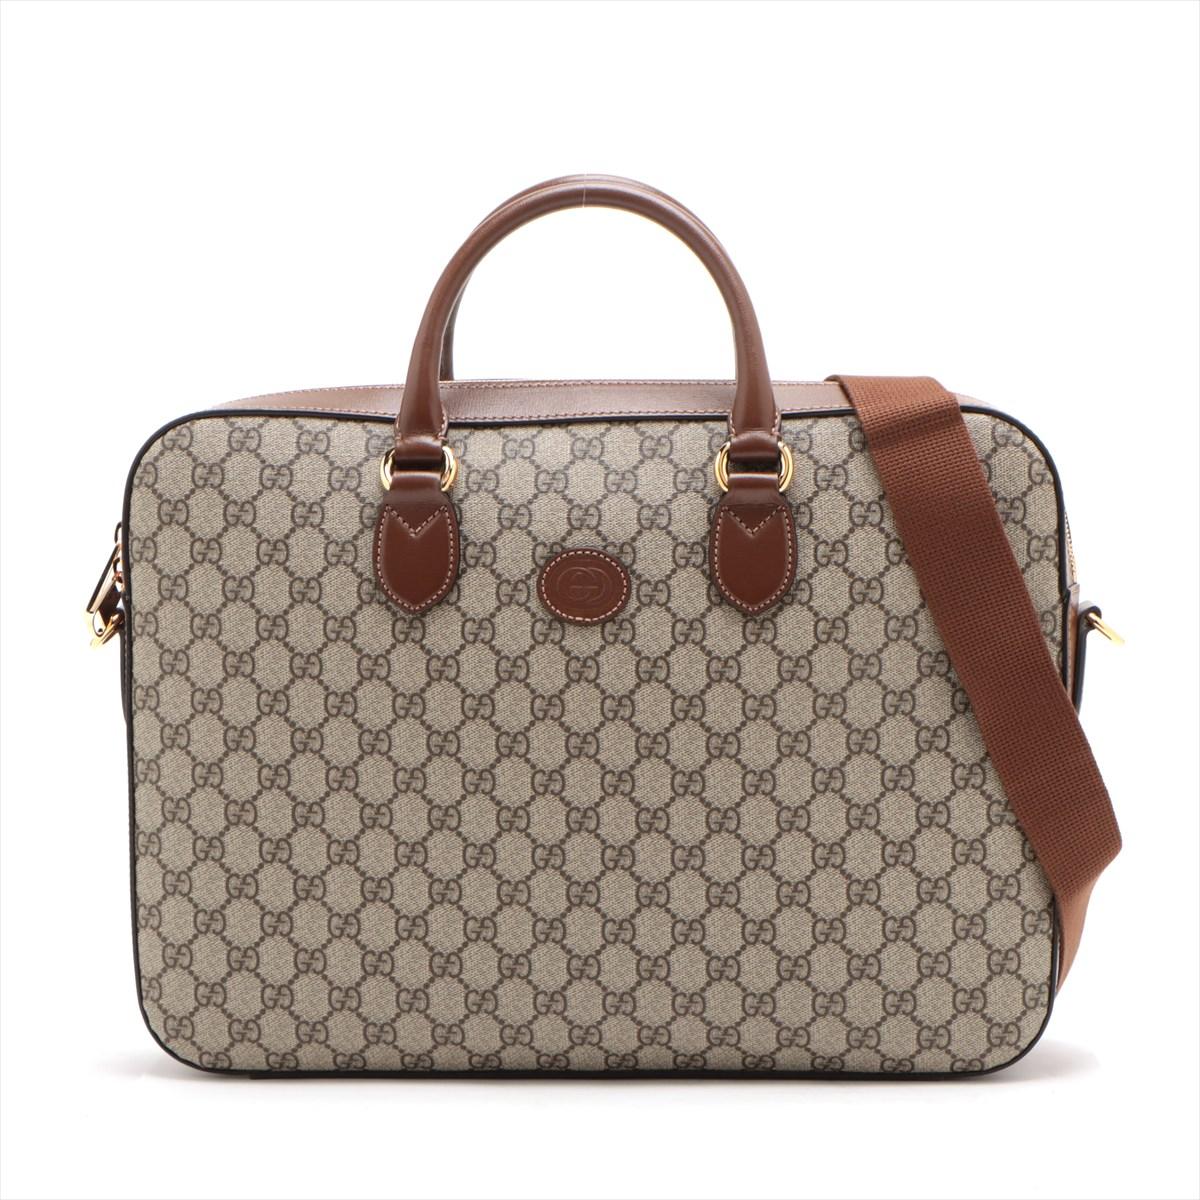 The Gucci GG Supreme Leather Two-Way Business Briefcase in Beige and Brown is a sophisticated and versatile accessory that seamlessly combines functionality with the iconic GG Supreme motif. Crafted from the signature GG canvas and leather trim, the